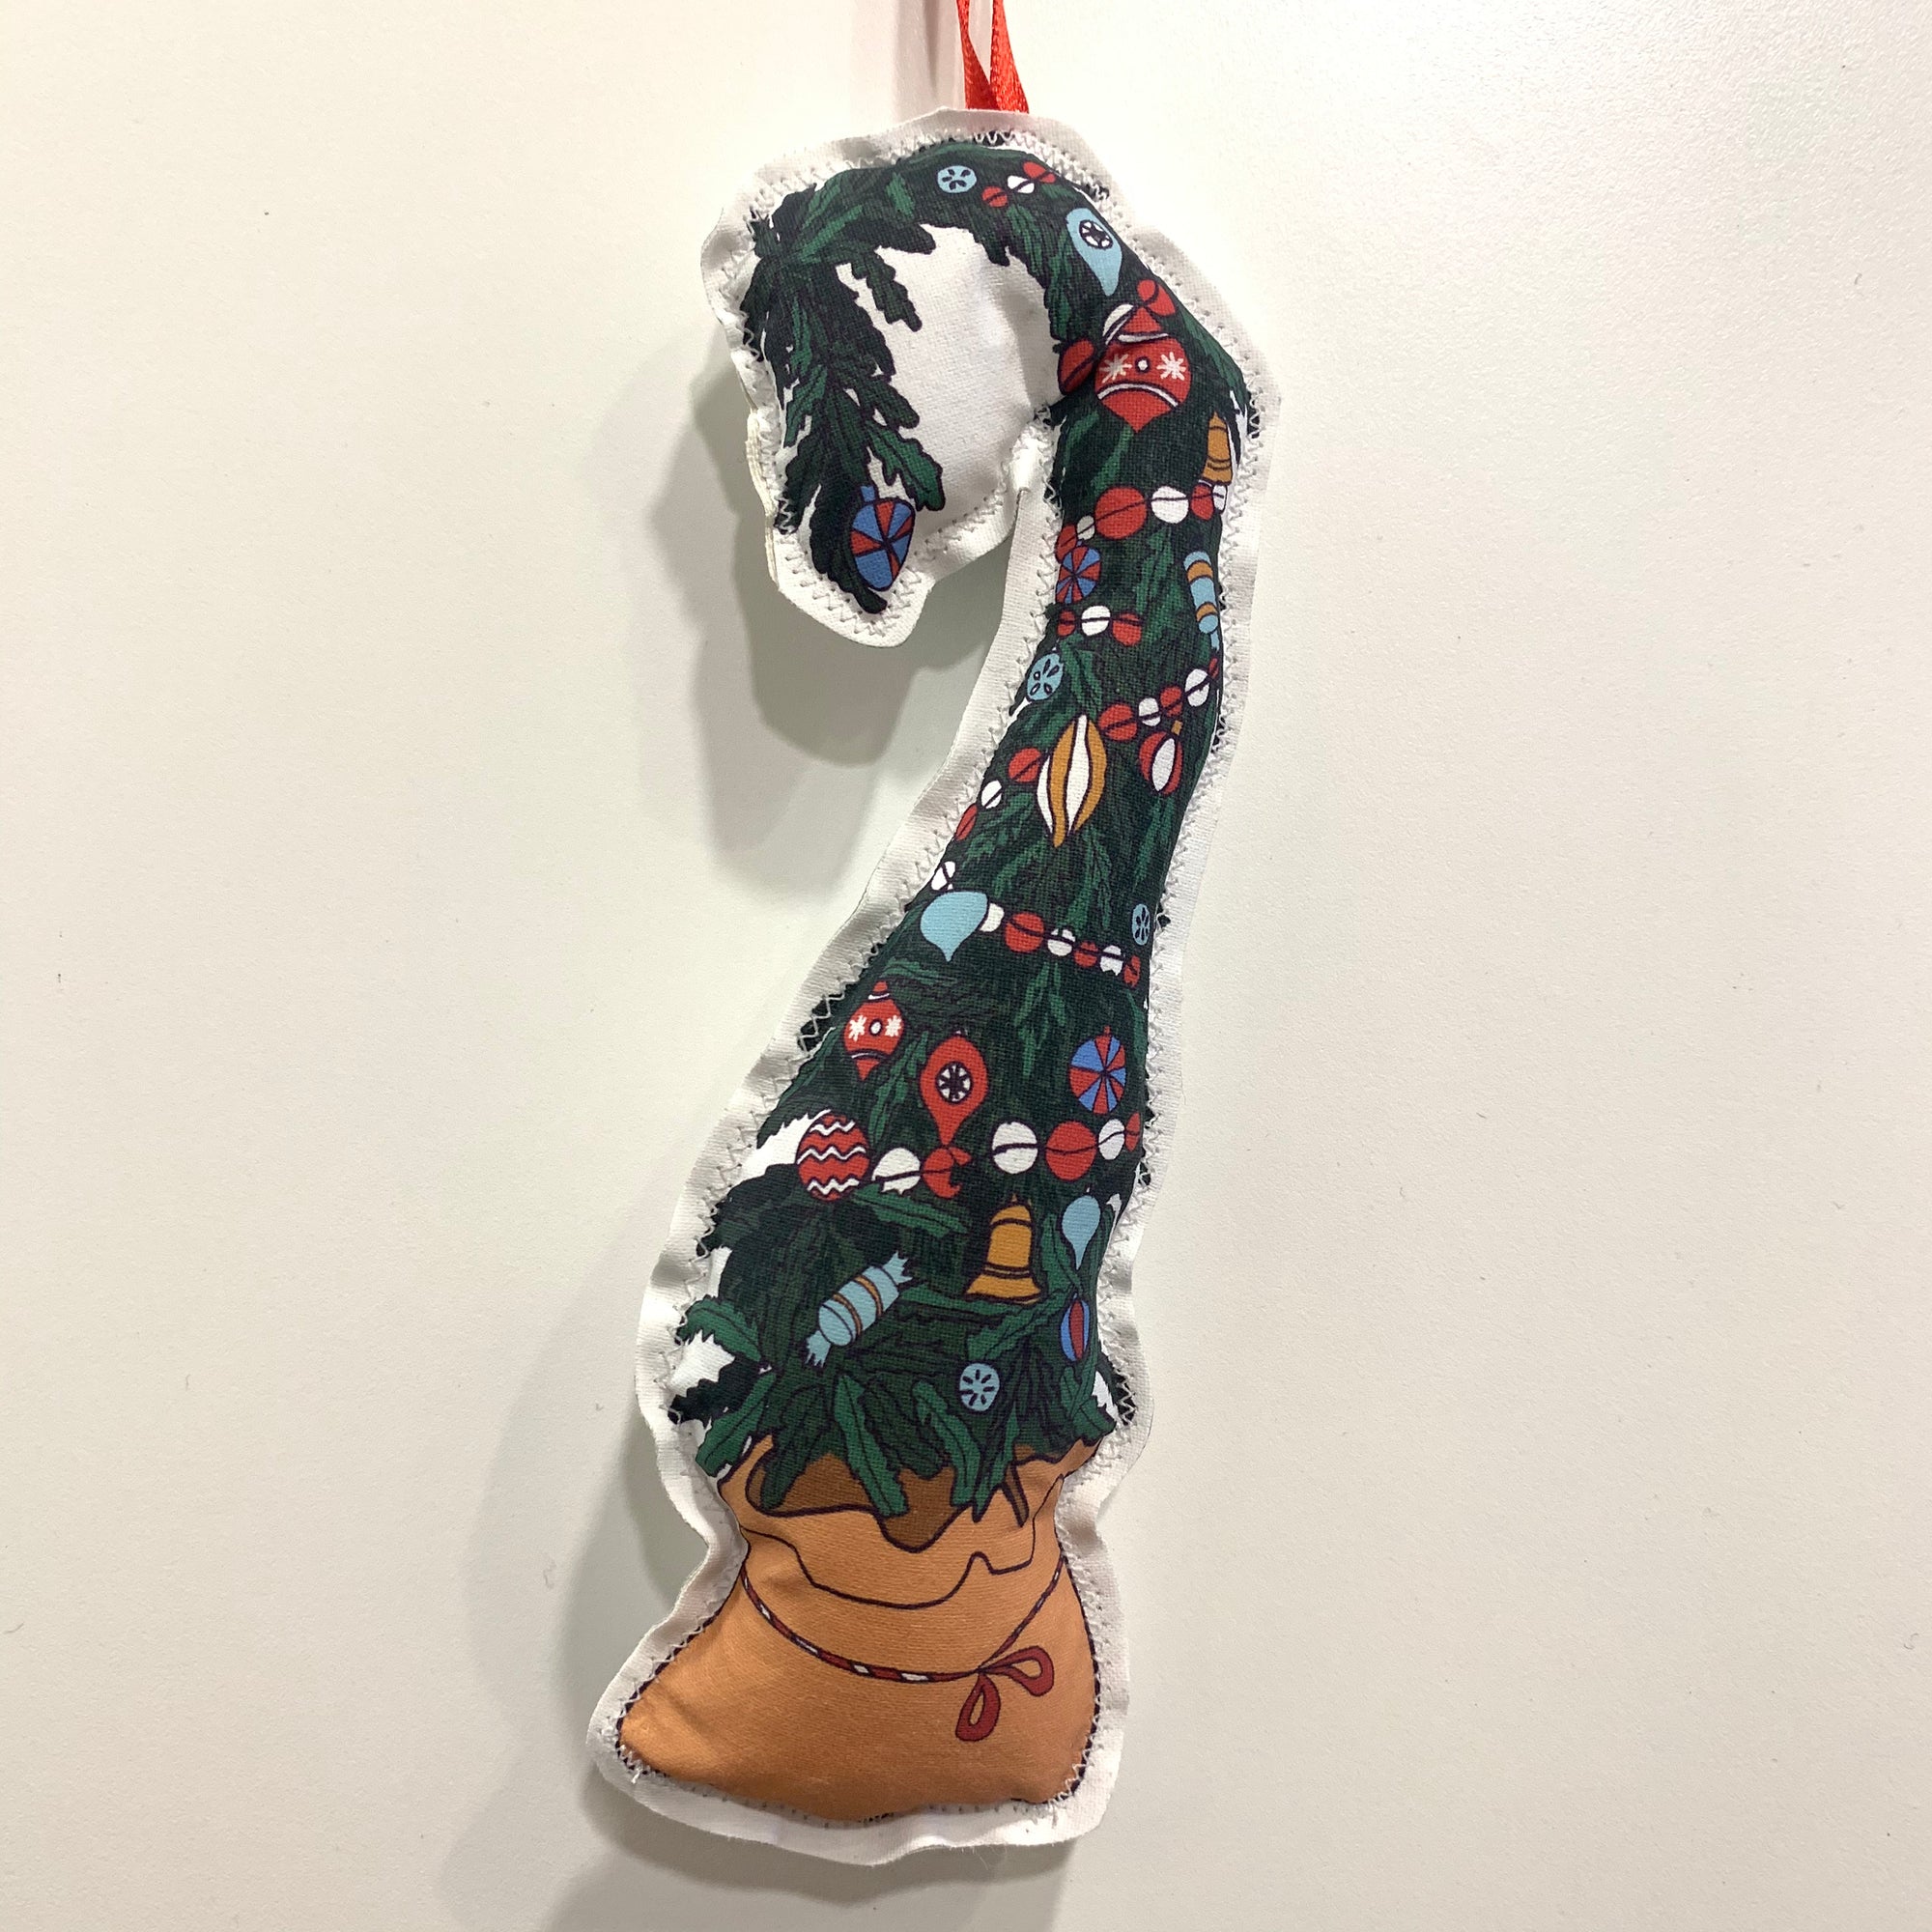 Whoville Christmas Tree Ornament